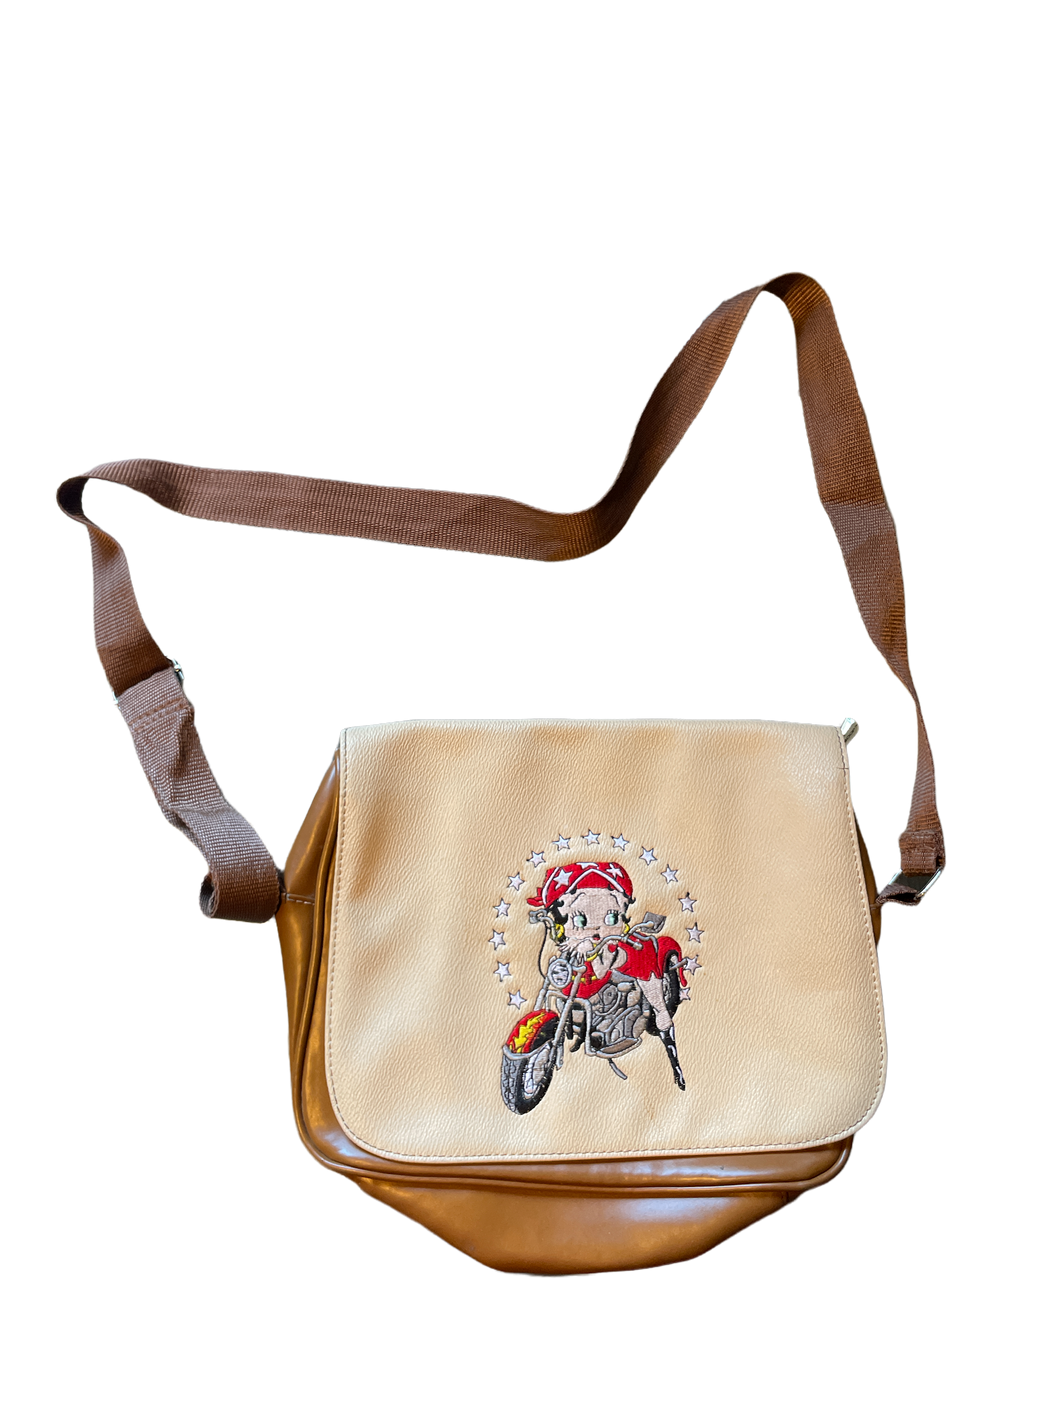 King Features Syndicate Betty Boop Satchel